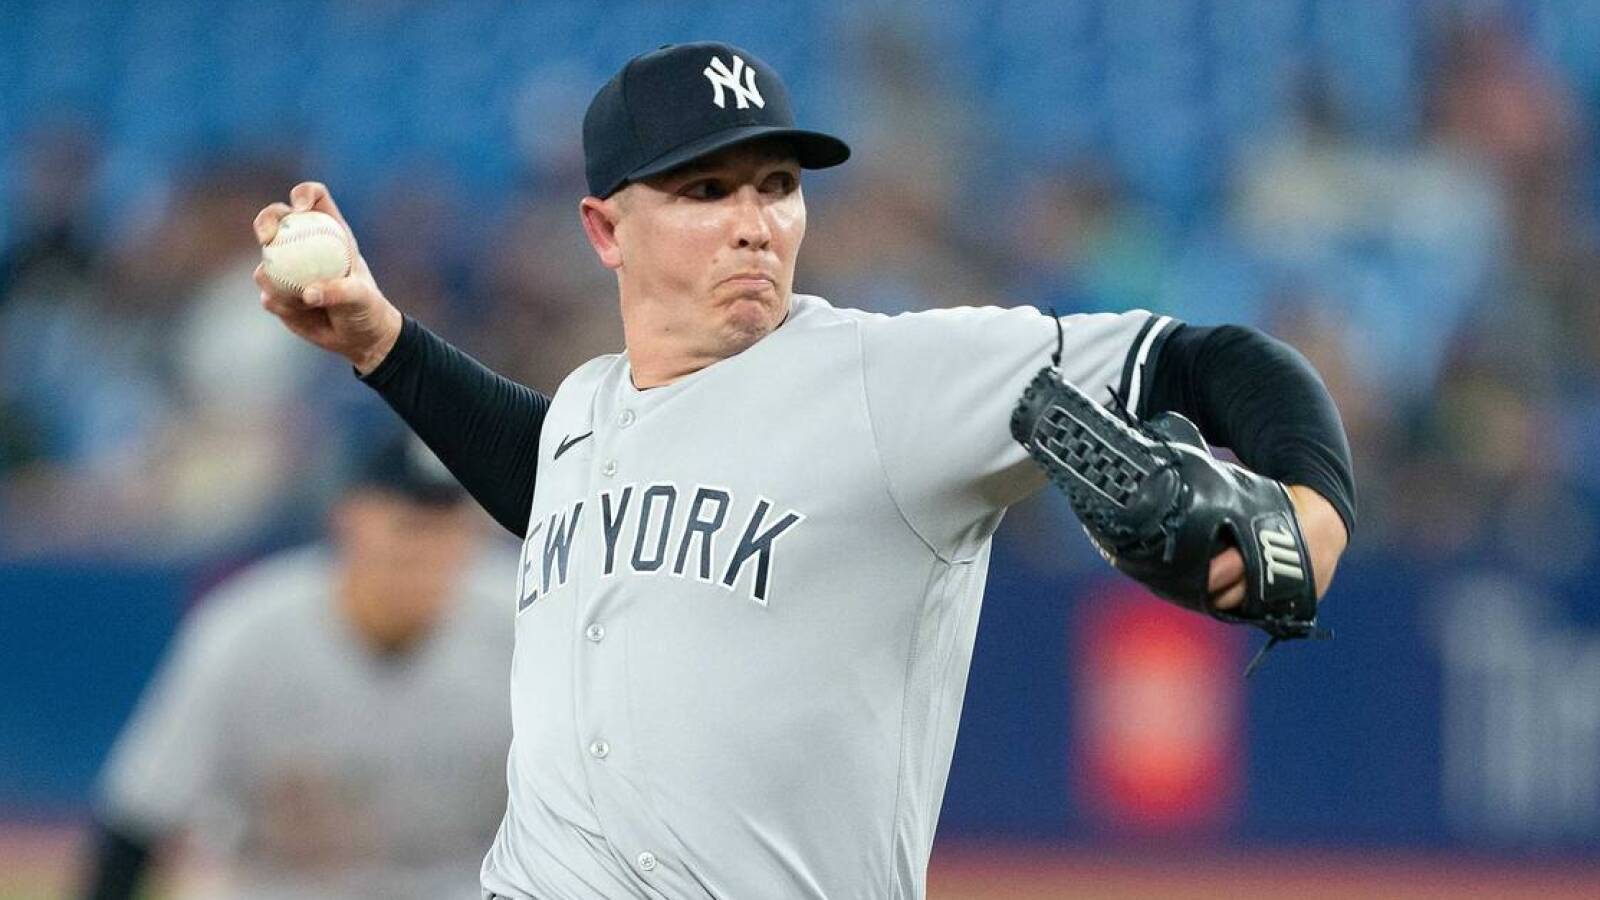 Yankees' Chad Green to undergo Tommy John surgery